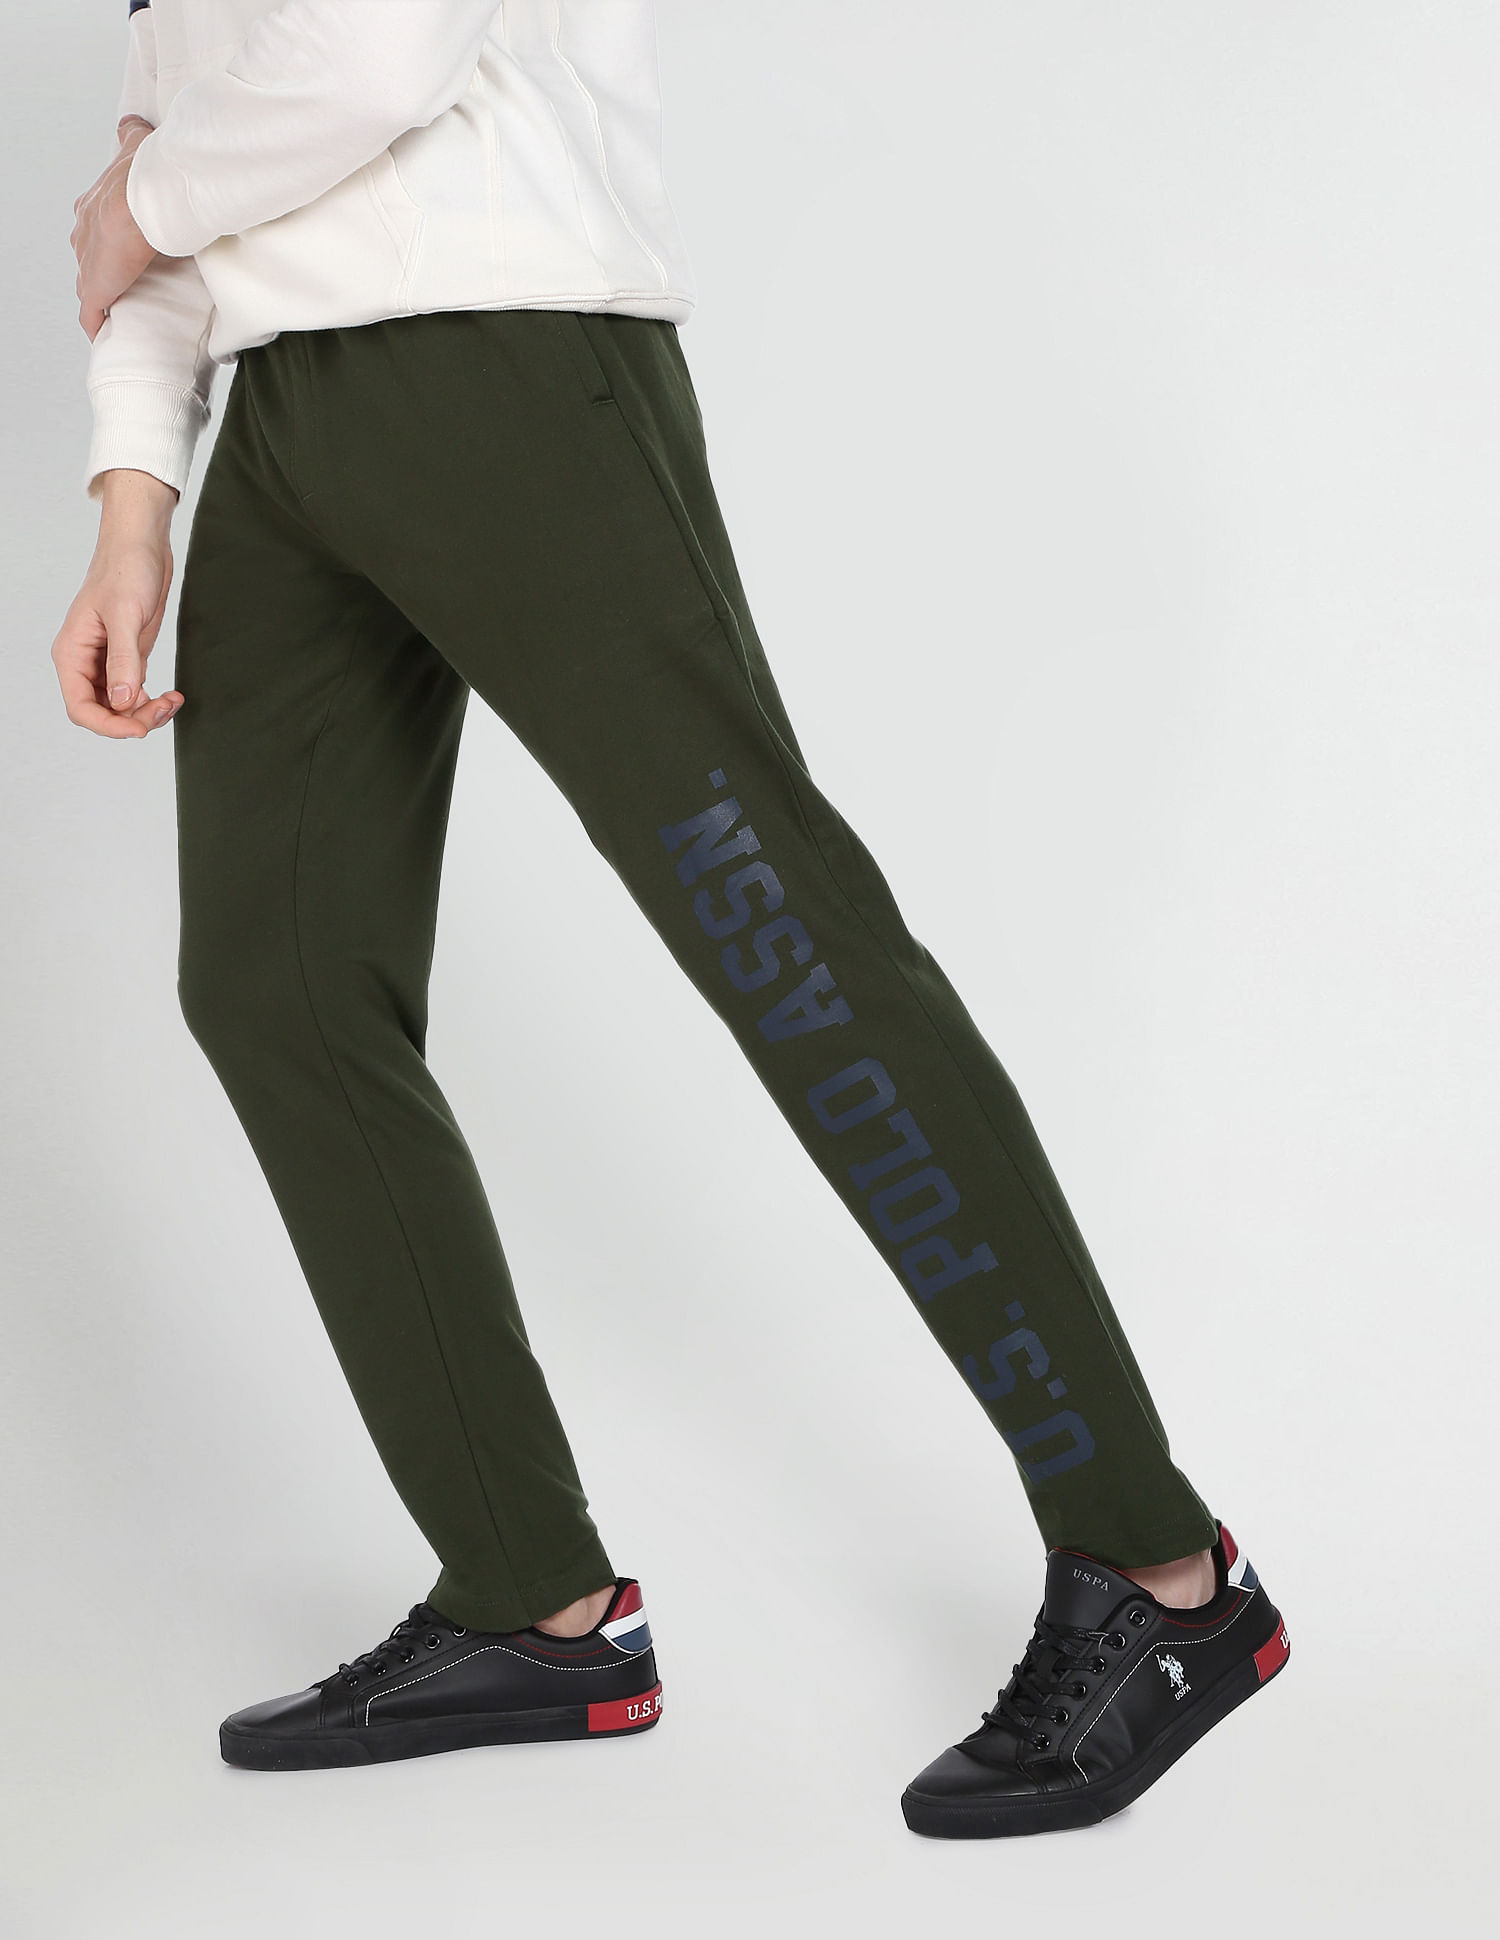 U.S. POLO ASSN. Colour Block Track Pants(Beige 30) : Amazon.in: Clothing &  Accessories